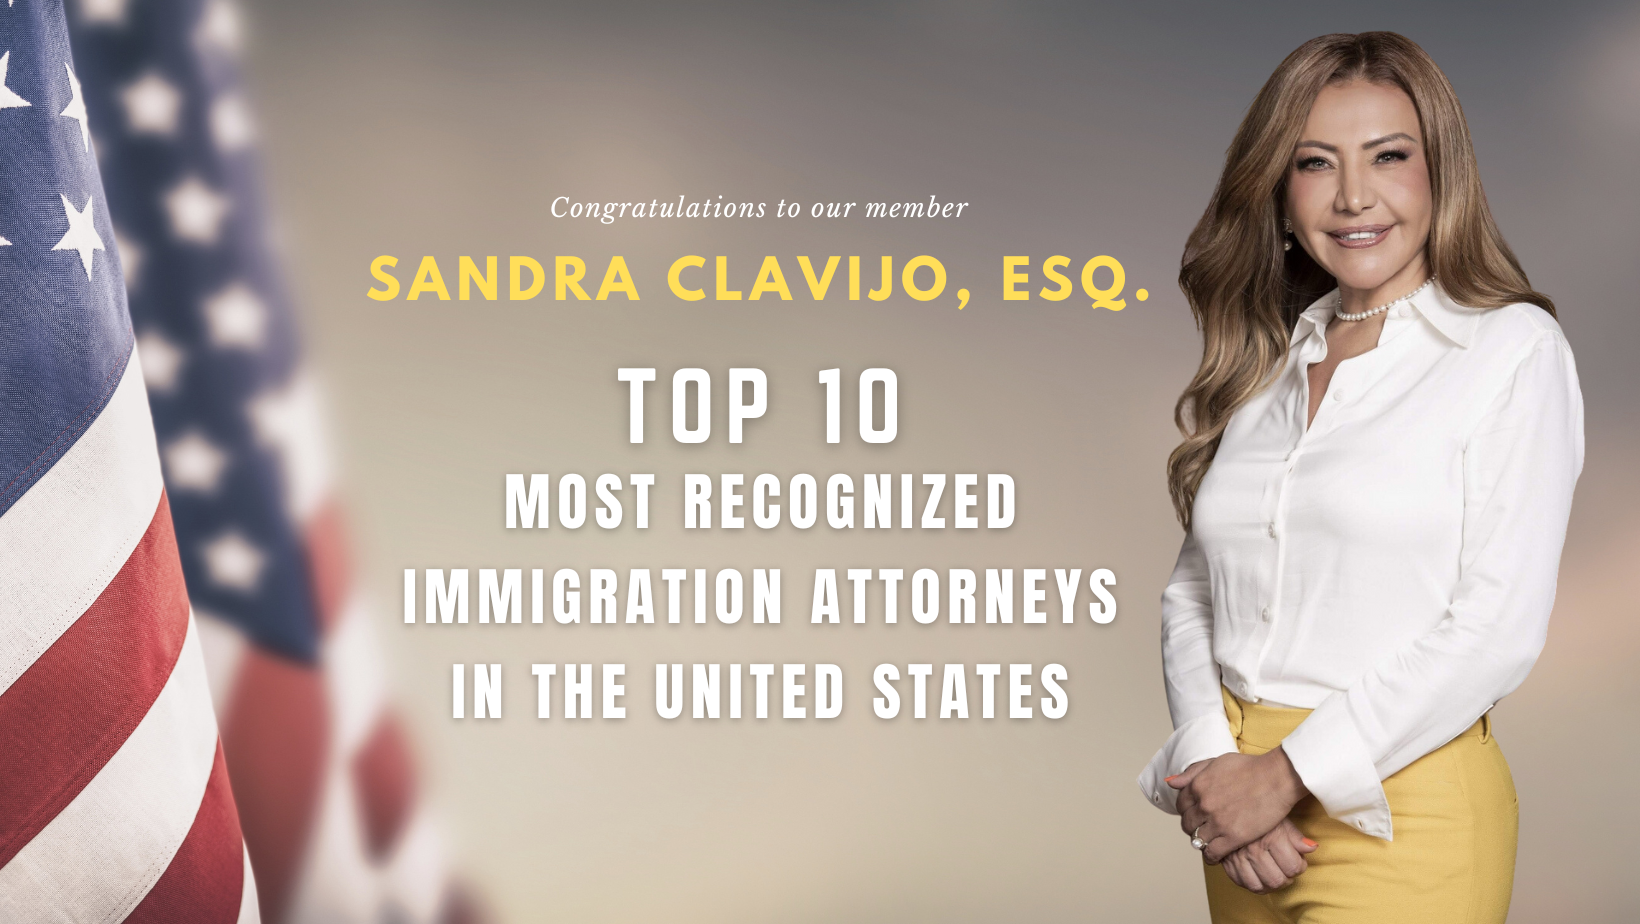 Embracing Excellence: Congratulations to Sandra Clavijo as one of the top 10 most recognized immigration attorneys in the United States